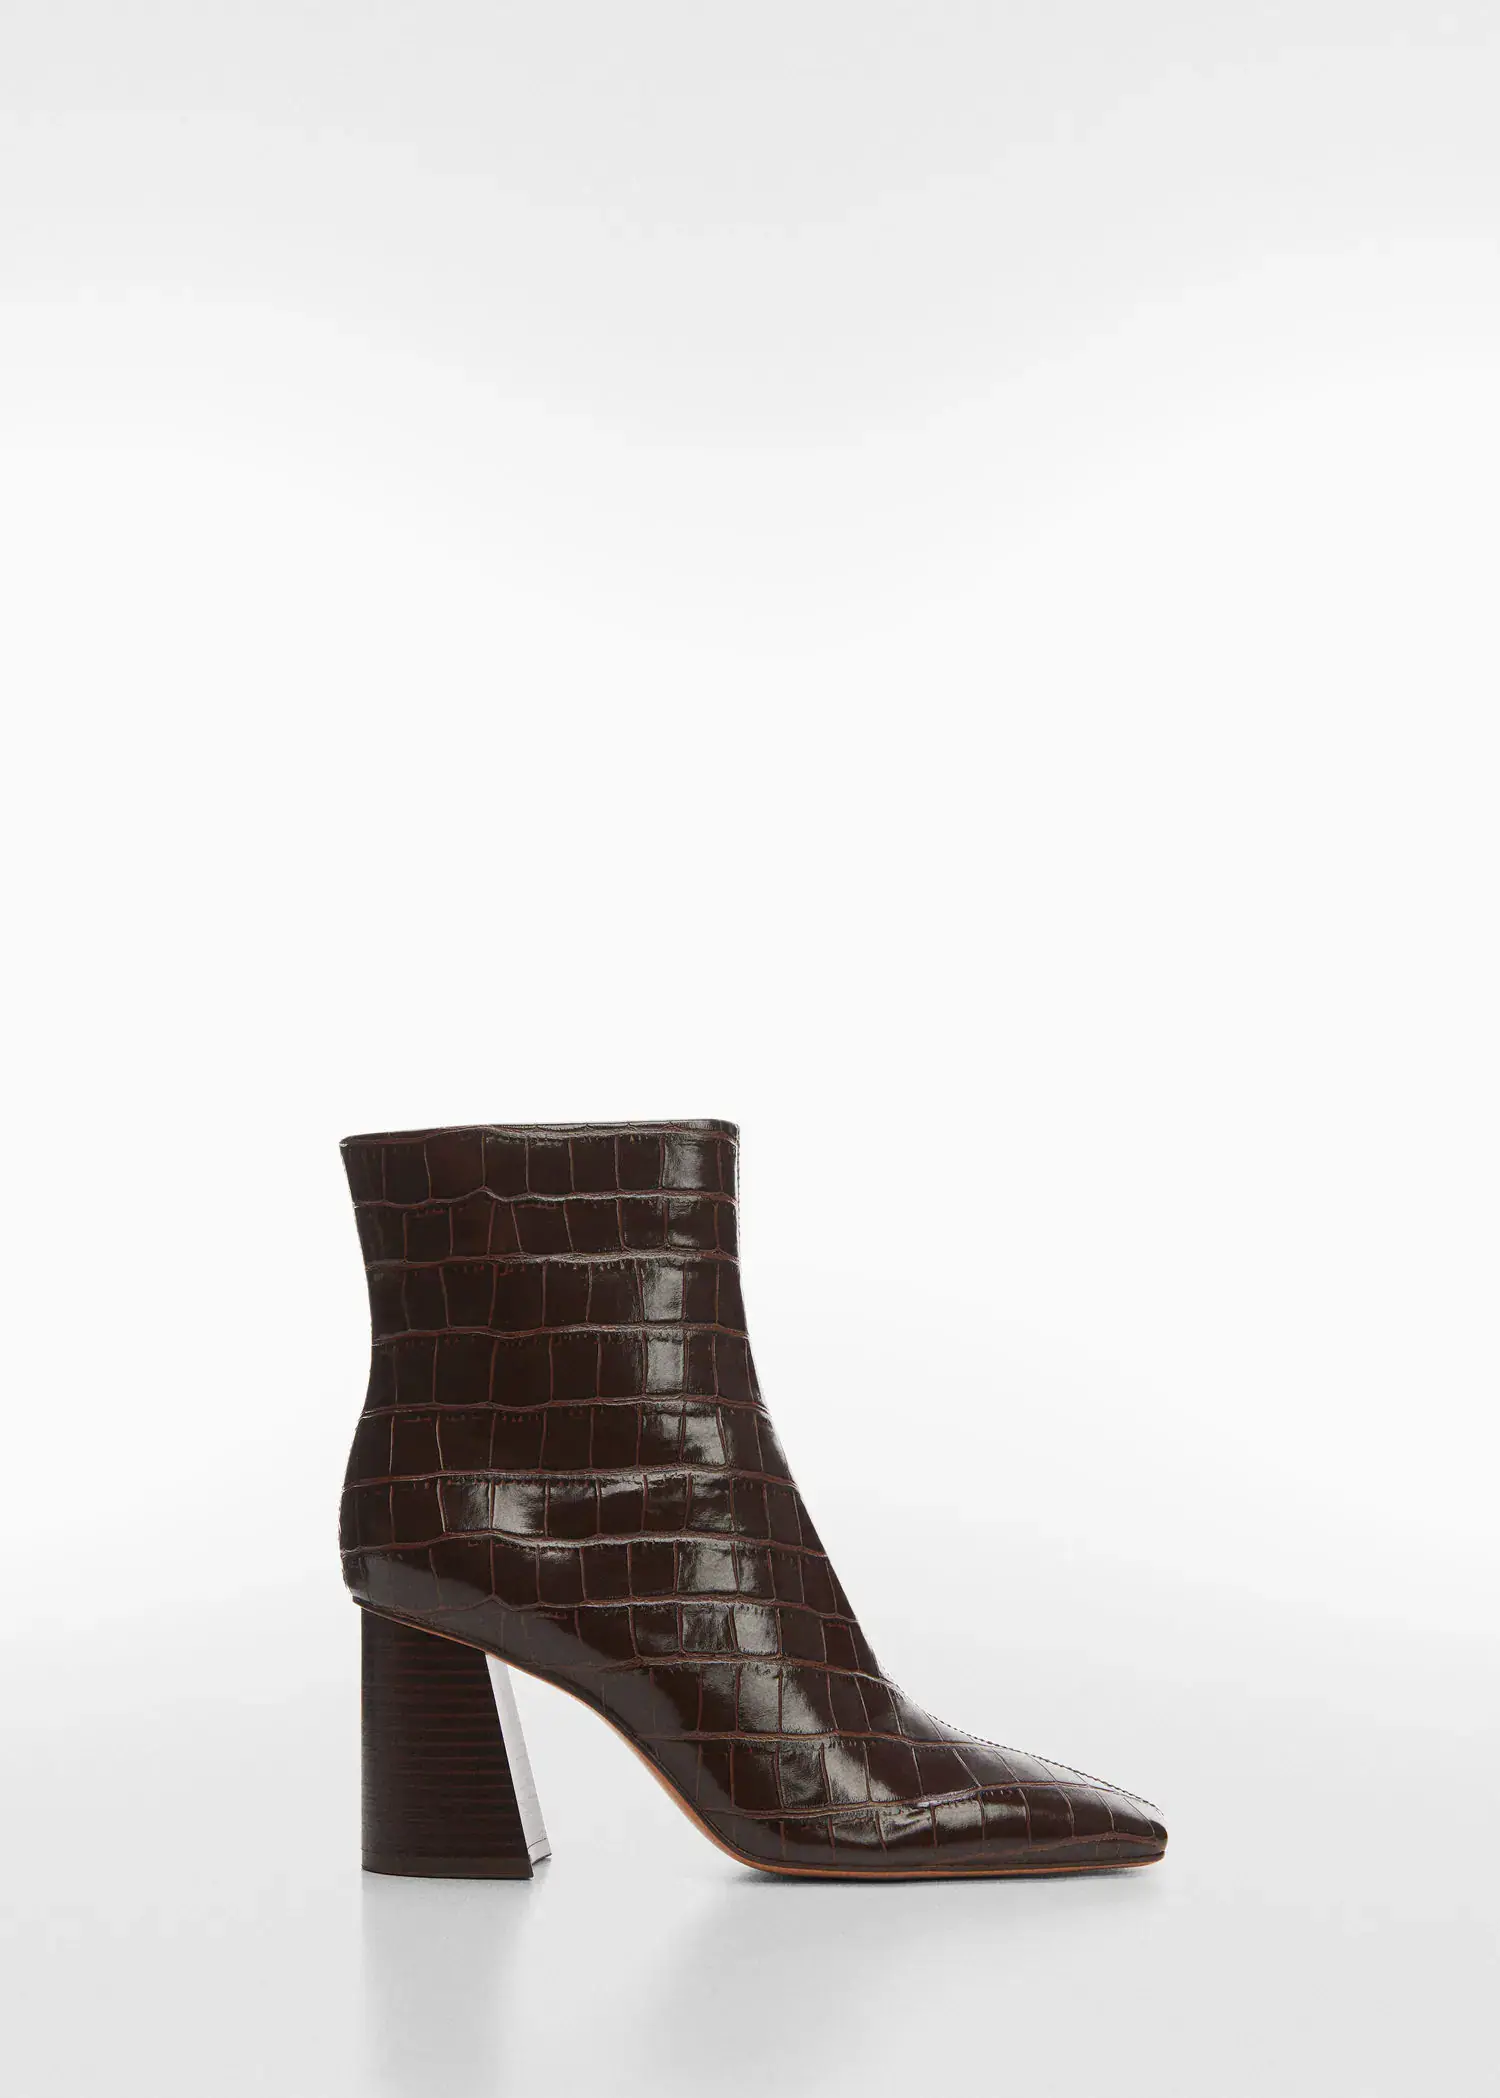 Mango Ankle boots with square toe heel. 1